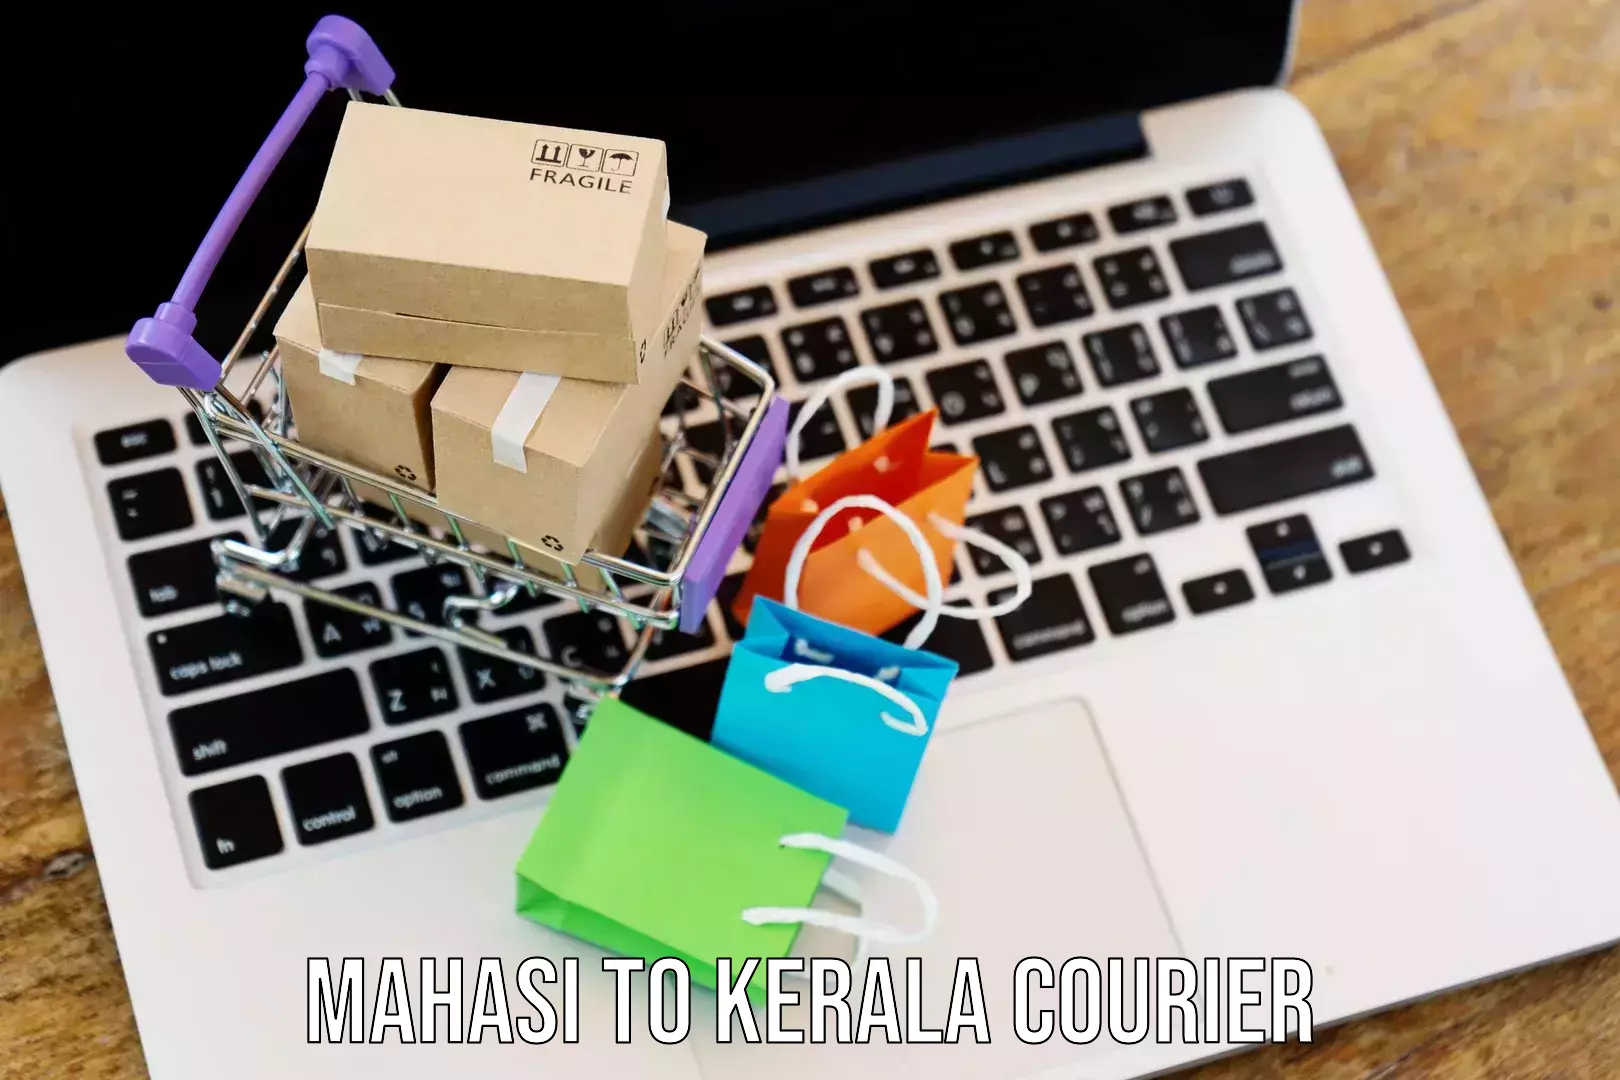 Efficient package consolidation Mahasi to Thrissur